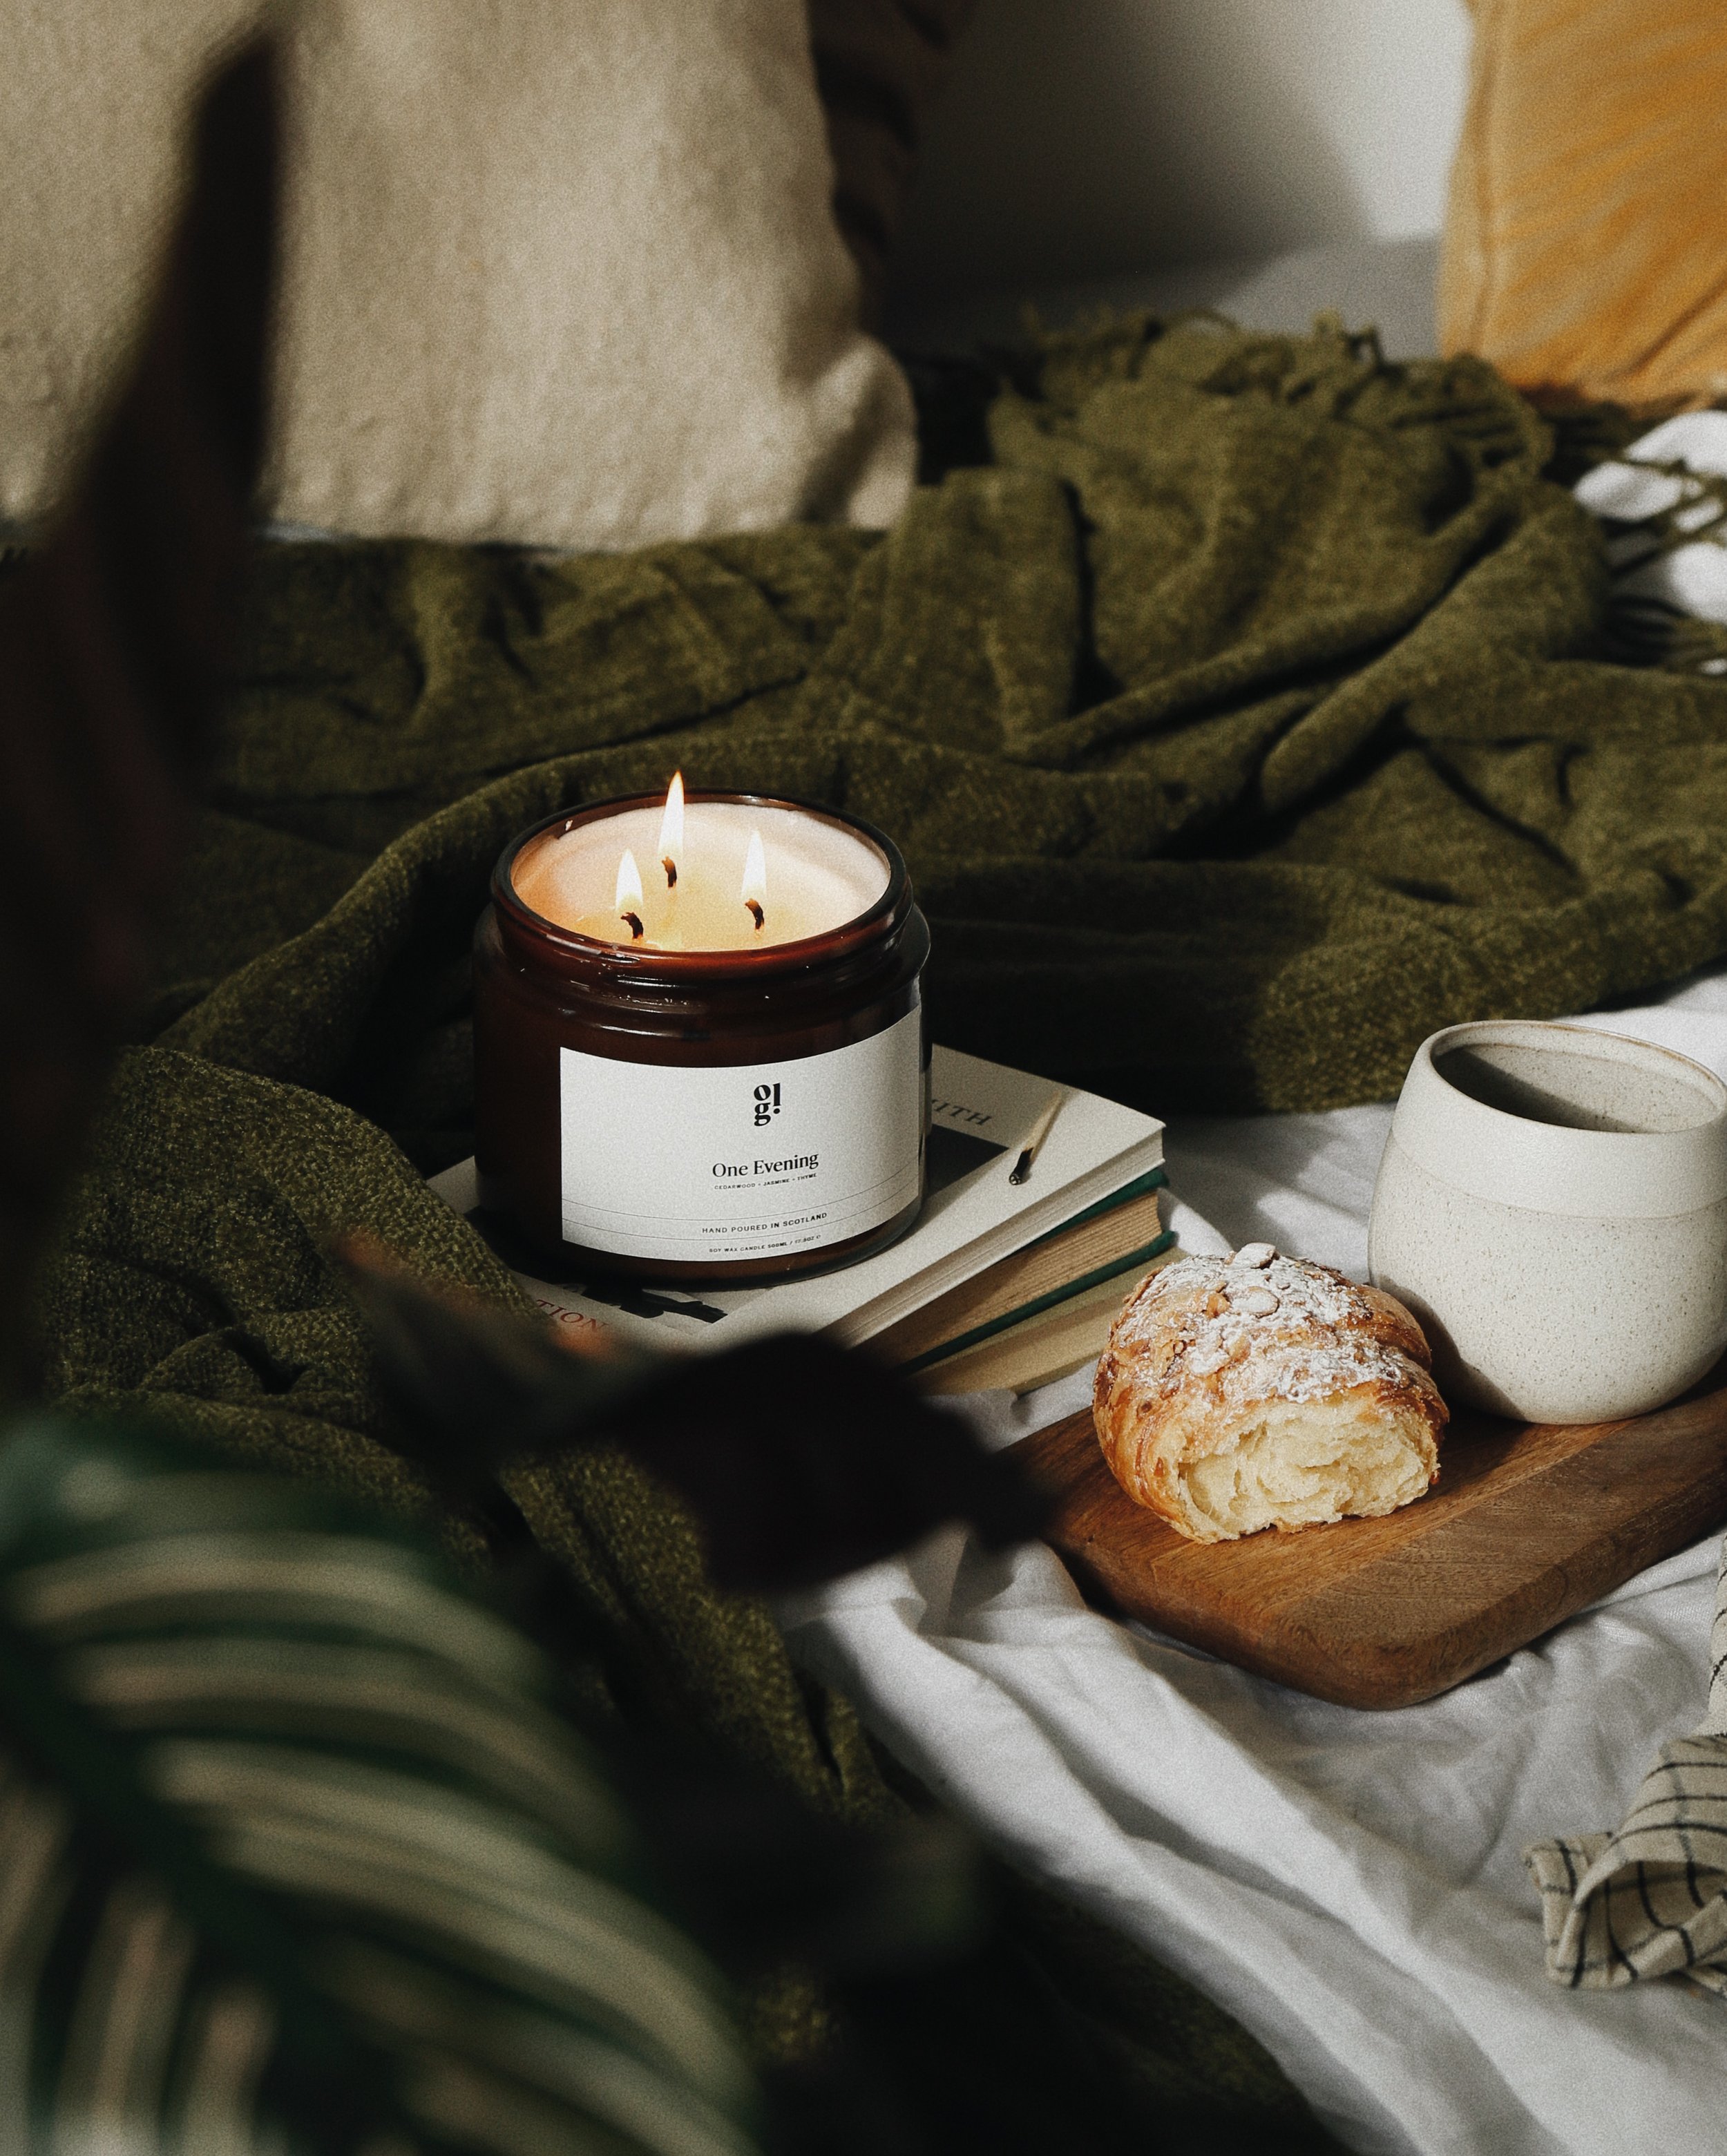 Our Lovely Goods candle in a cosy setting